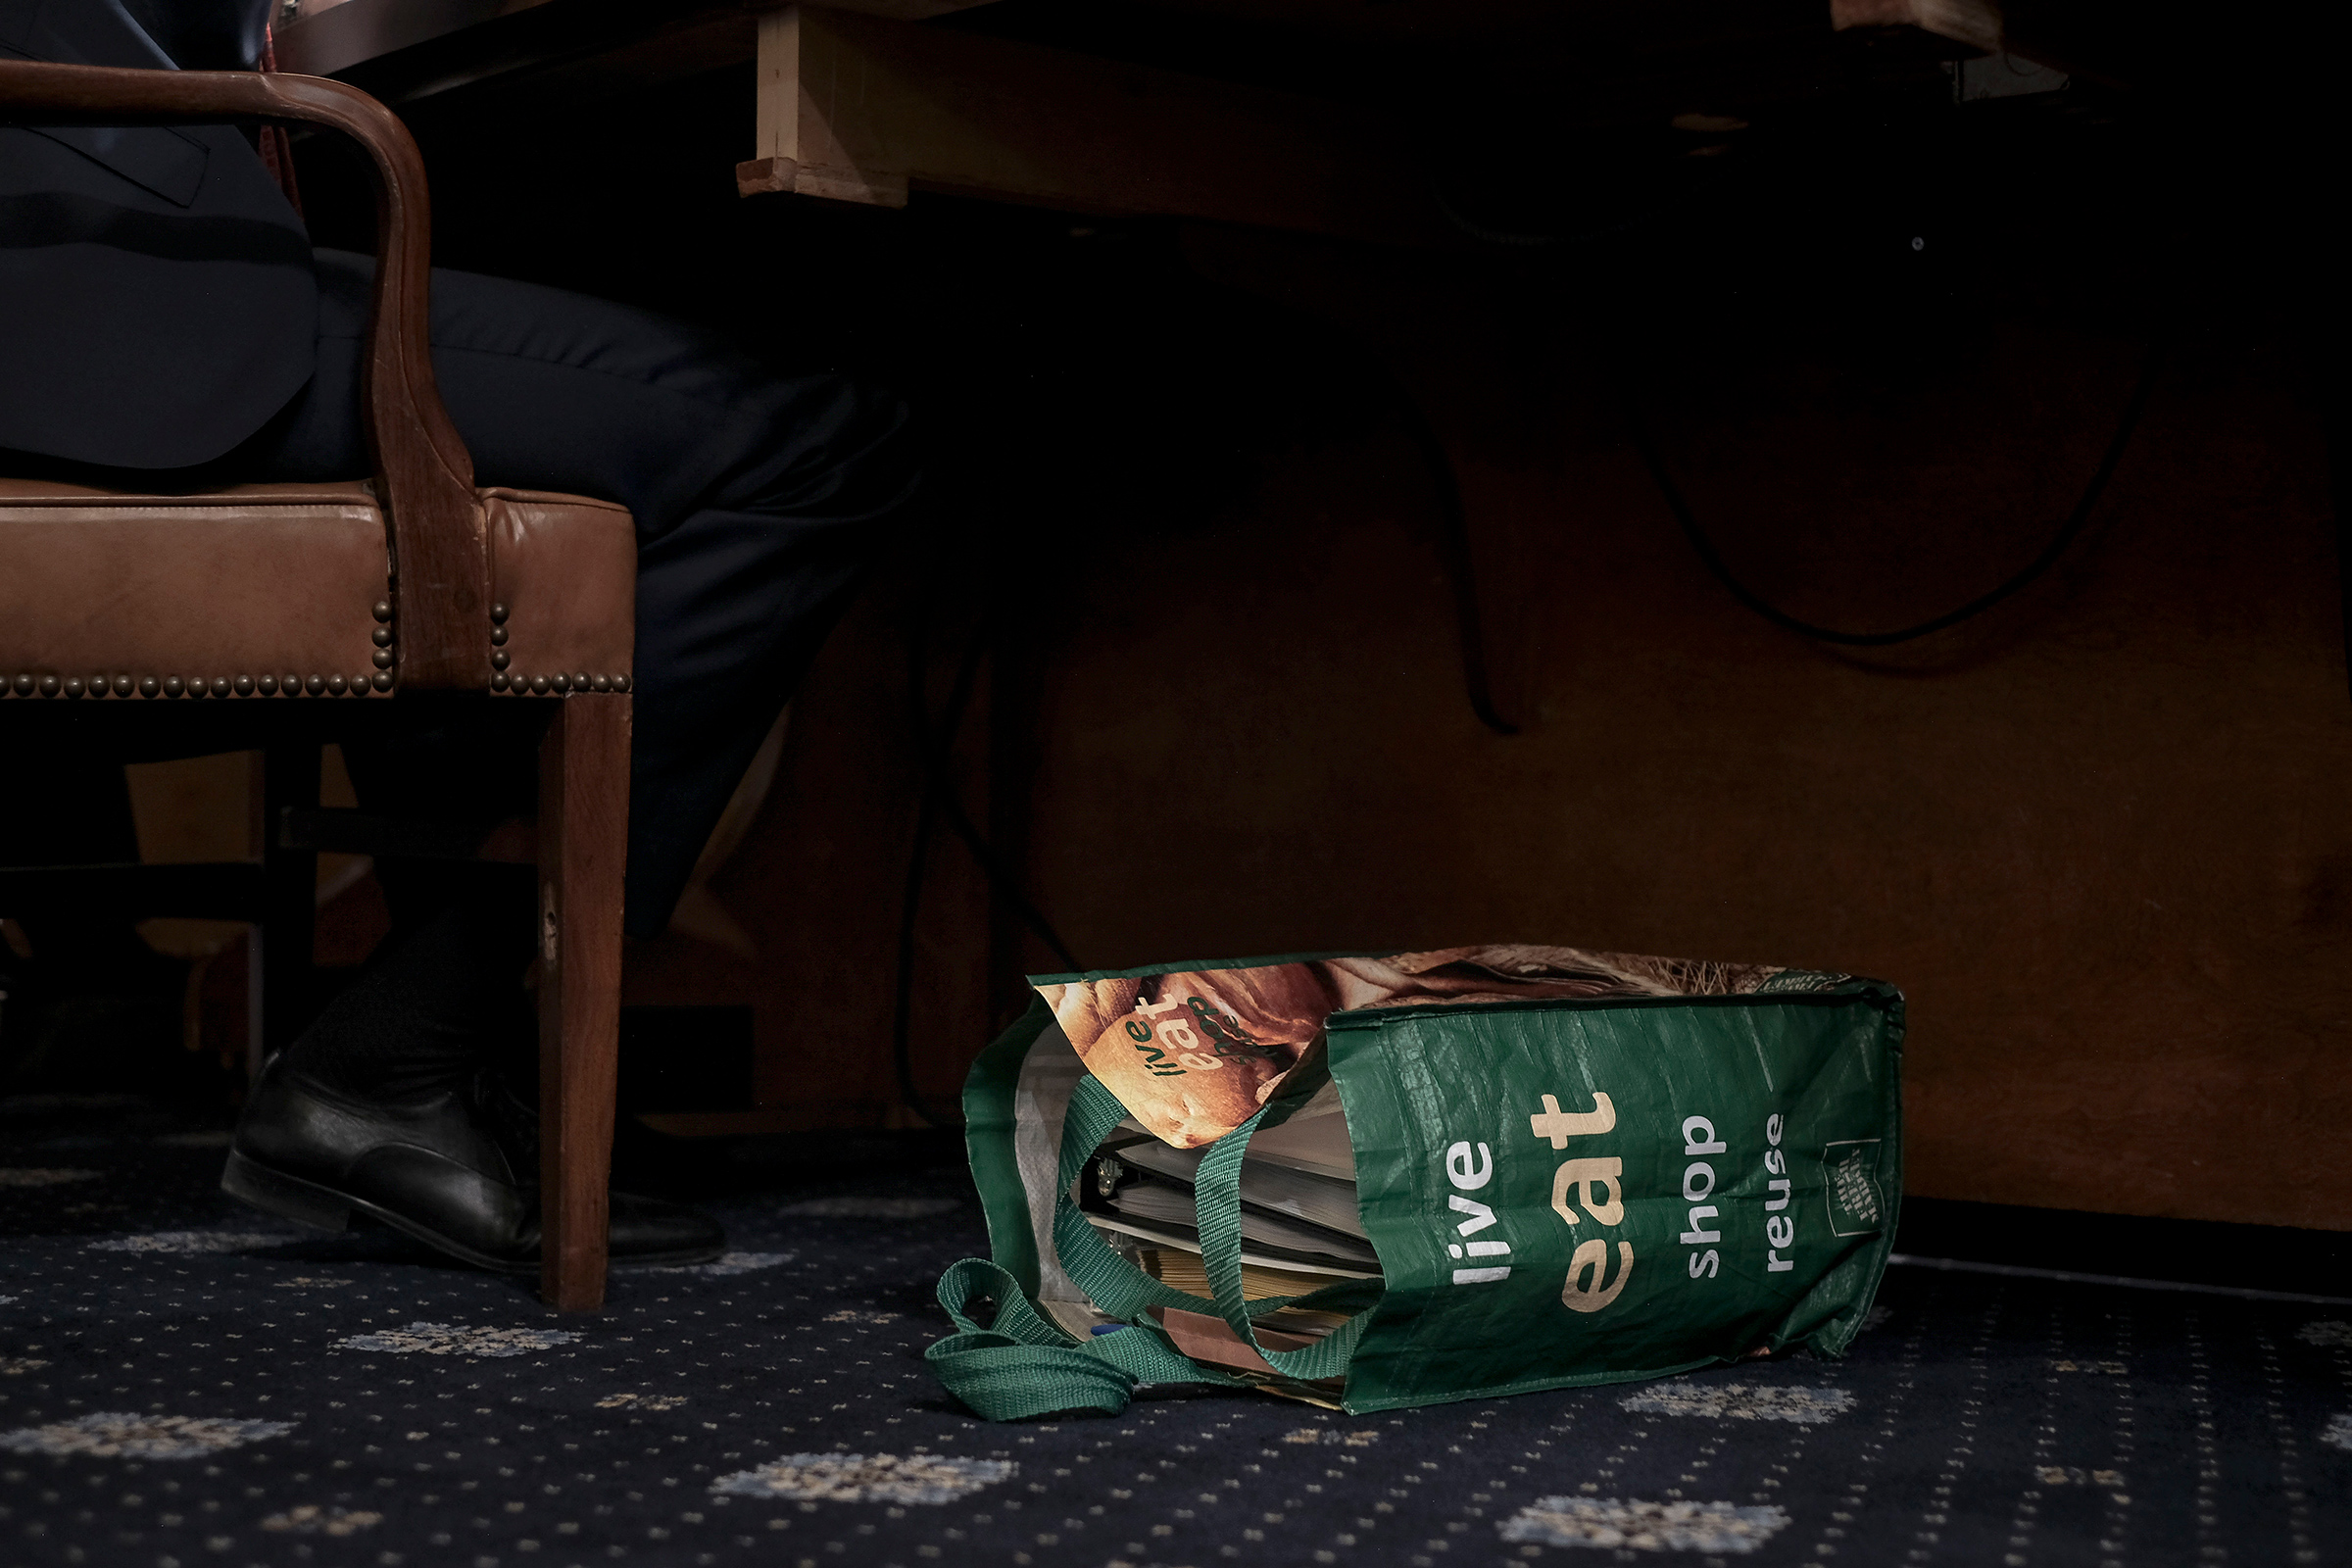 A reusable shopping bag filled with documents and notes sit at the feet of Stephen Castor, the Republican counsel to the Judiciary and Intelligence committee, at the beginning of the House Judiciary Committee hearing on the impeachment inquiry in Washington, D.C., on Dec. 9, 2019.